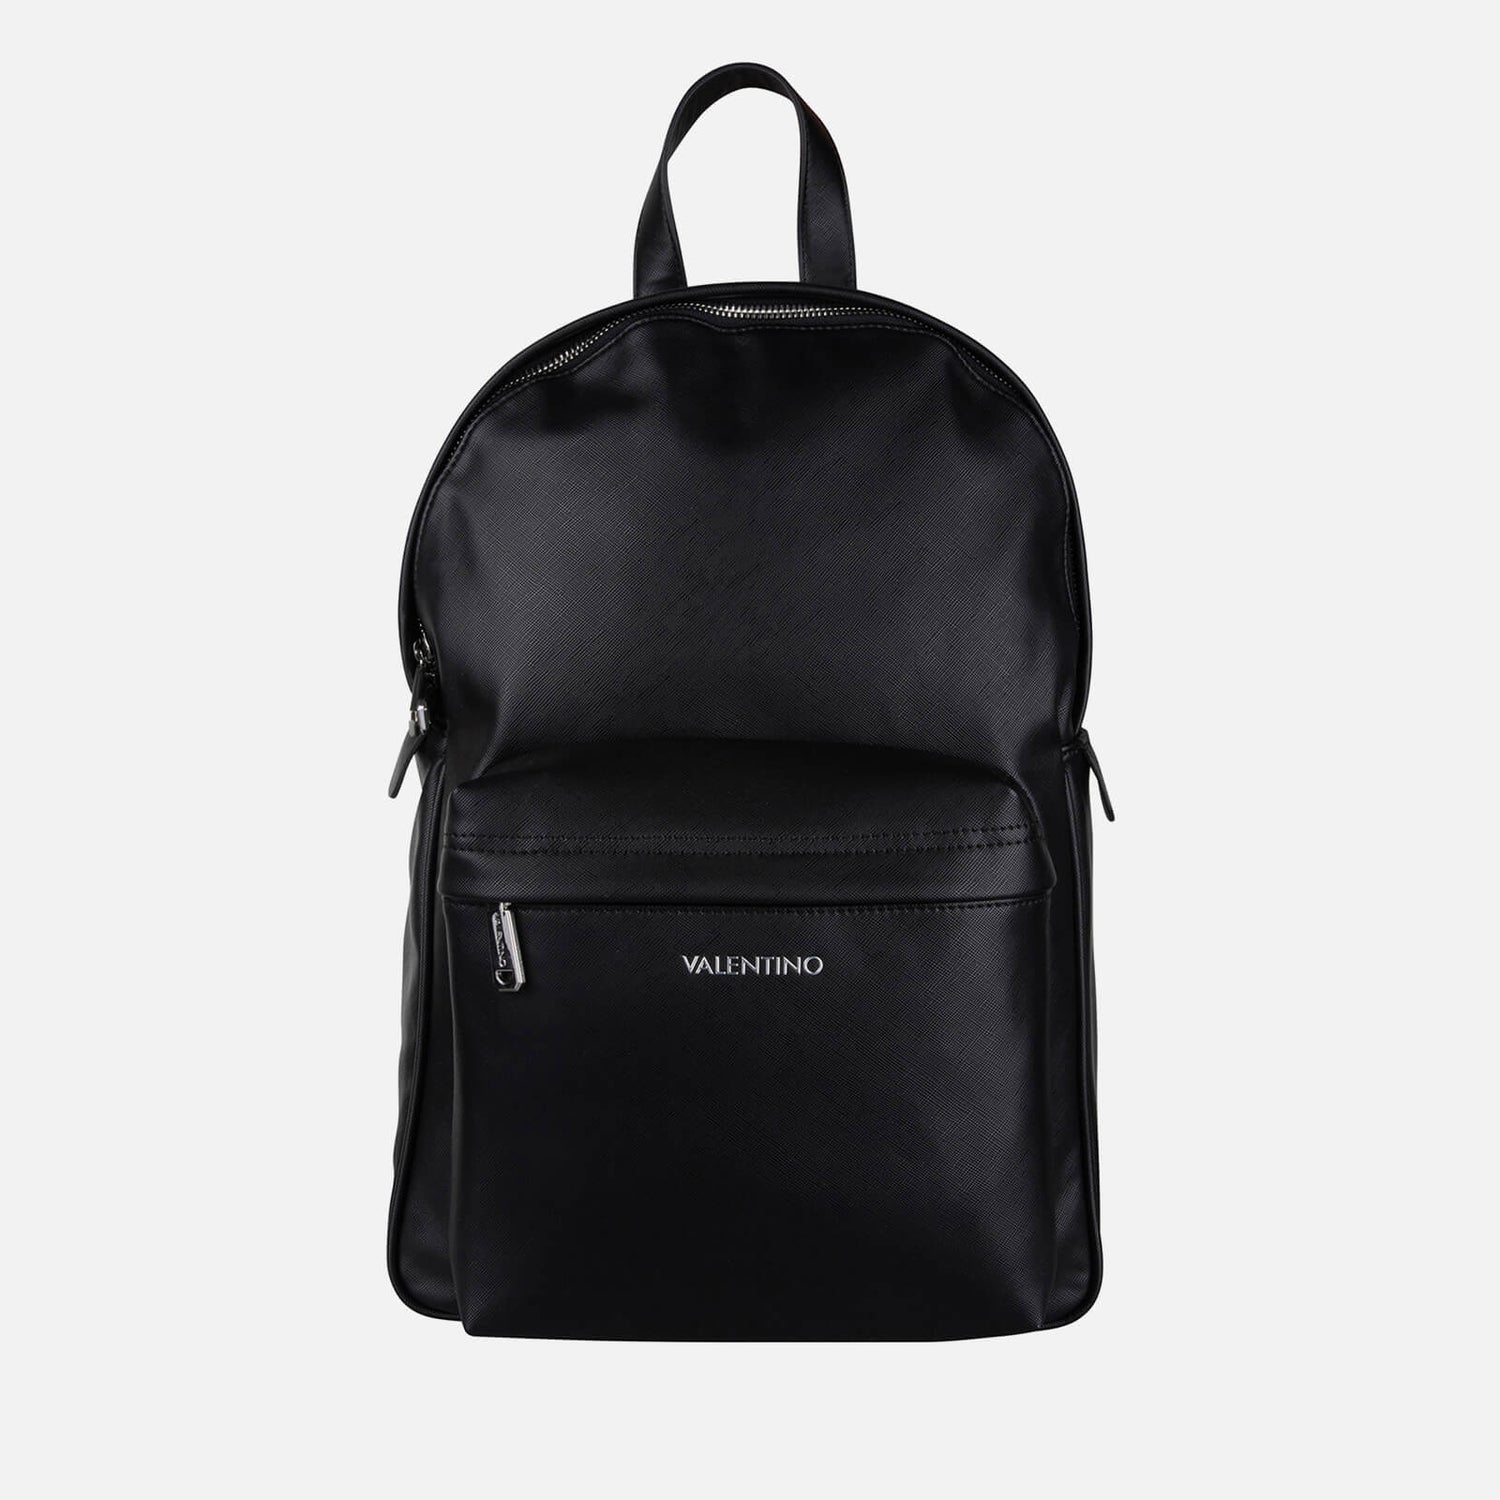 Valentino Marnier Faux Leather Backpack | TheHut.com